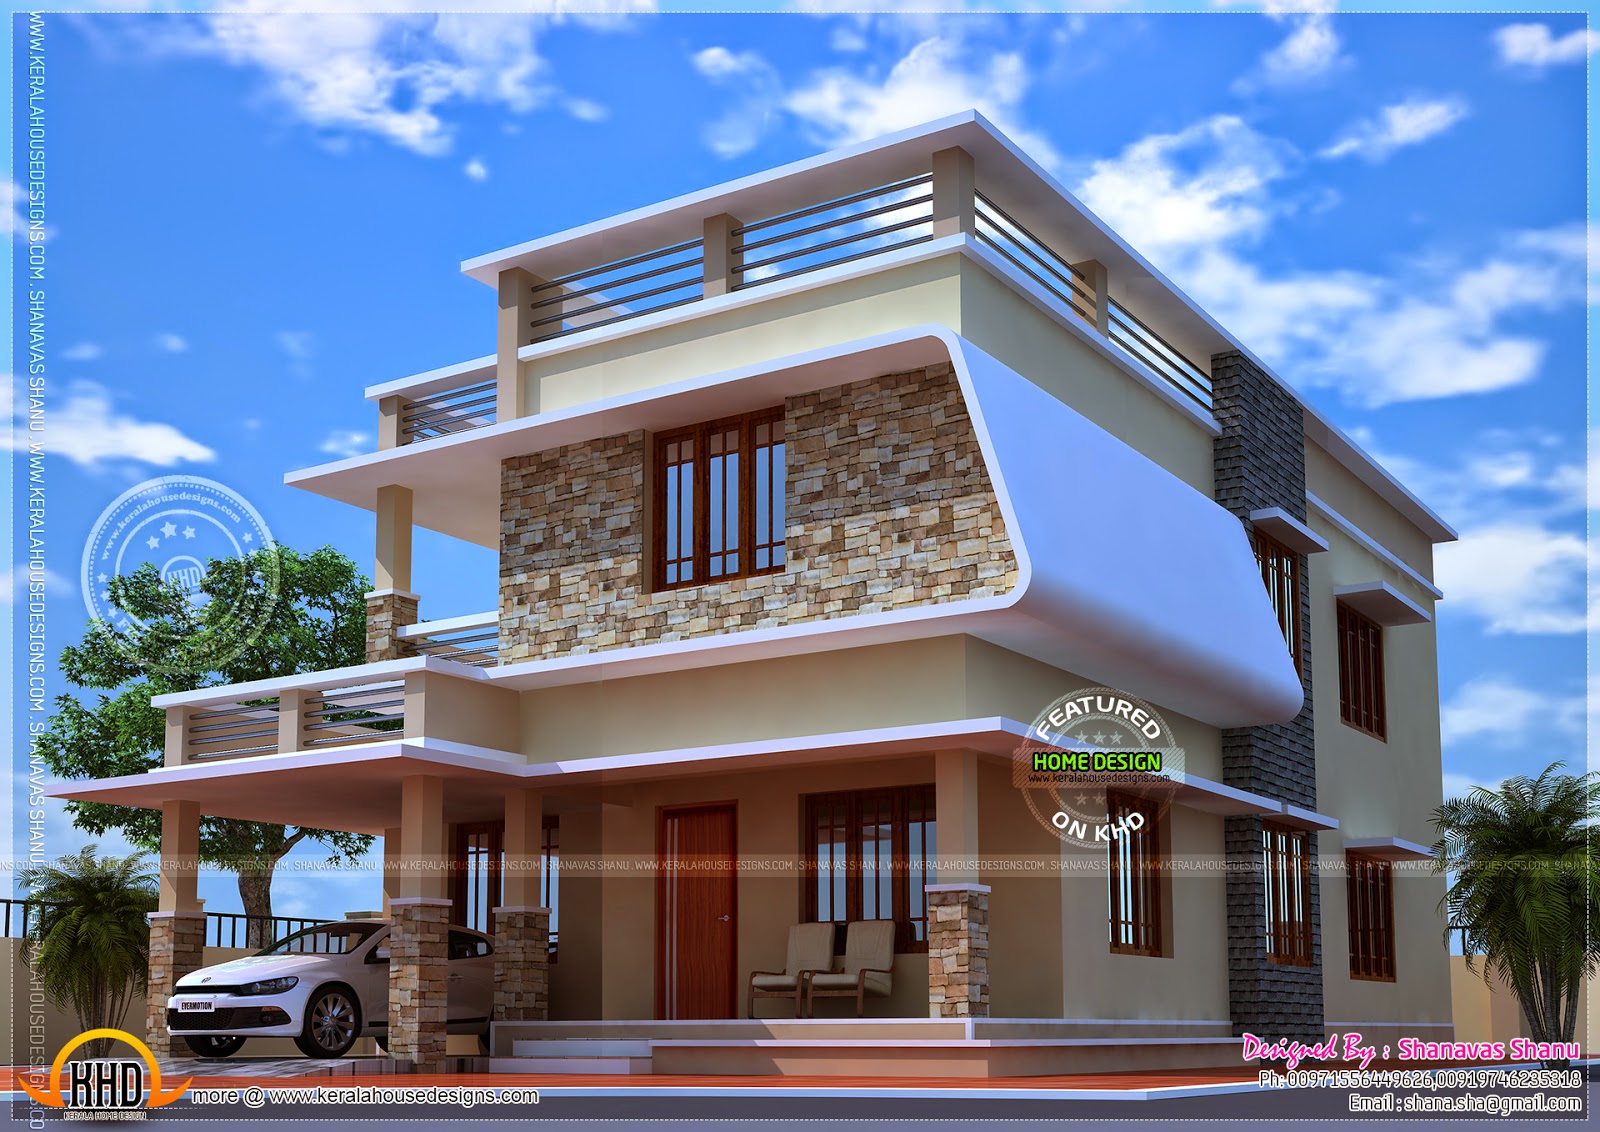  Plans also Kerala 3 Bedroom House Plans. on free small duplex floor